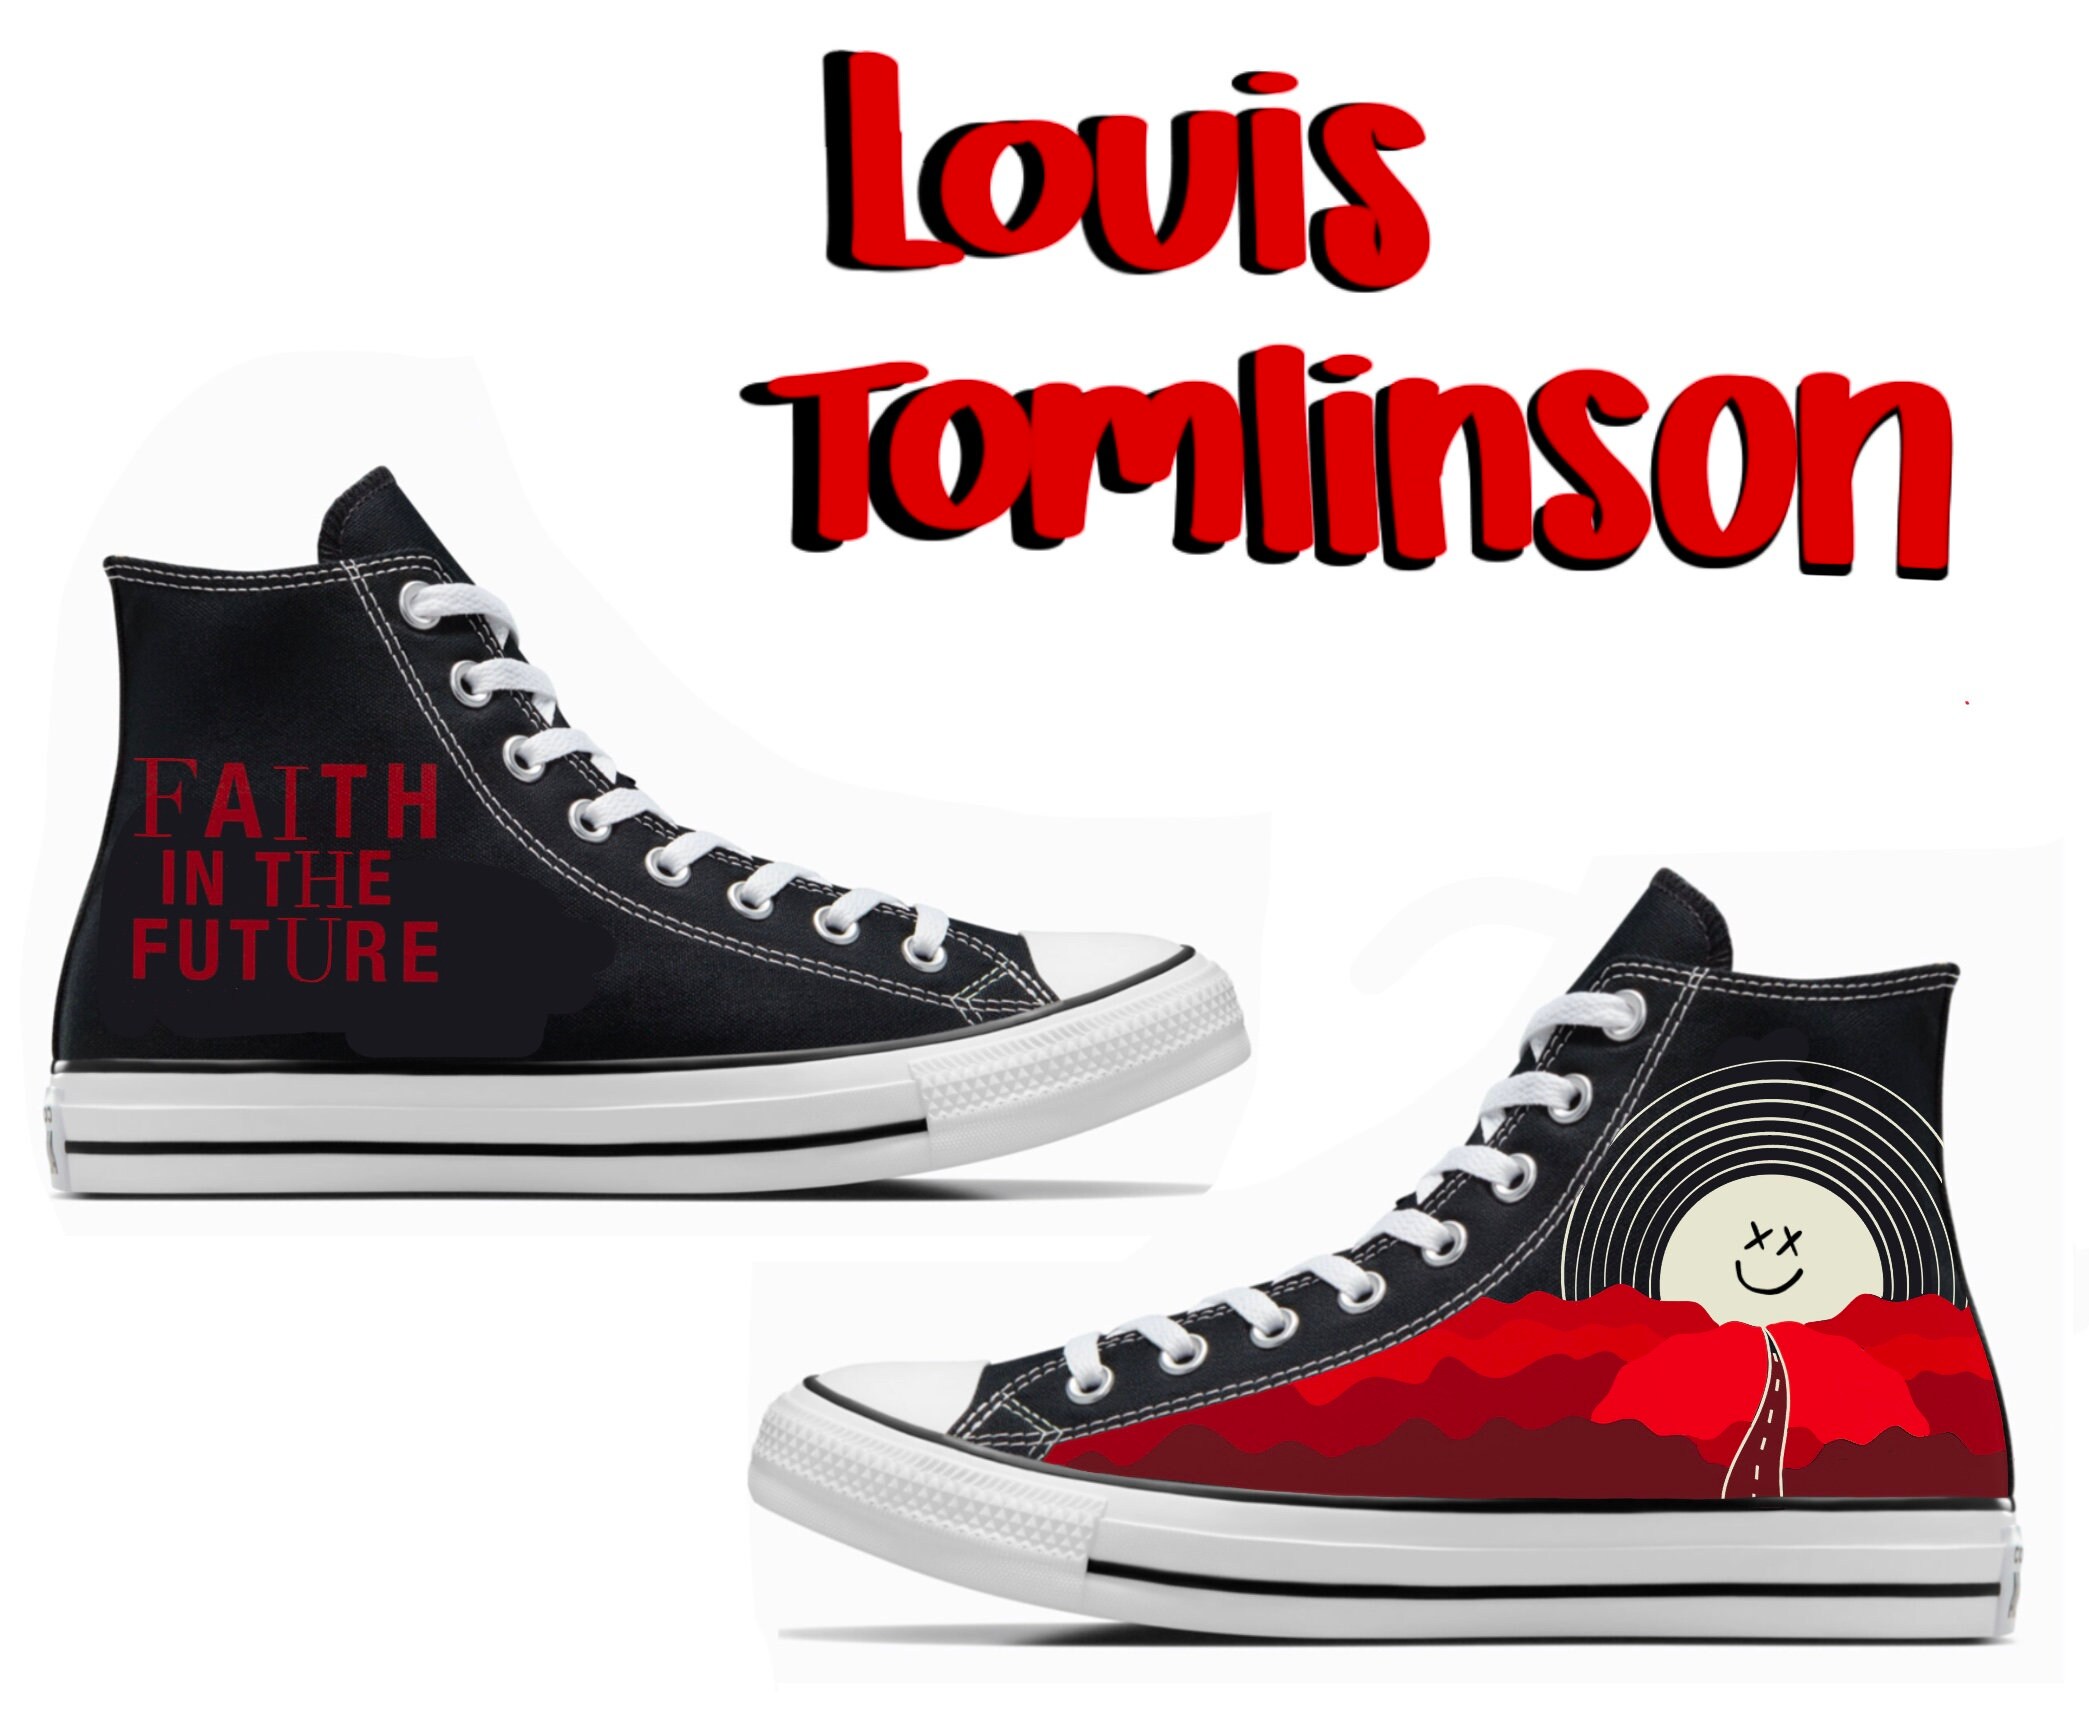 Louis Tomlinson tattoos - set of 6 [see products for more layouts